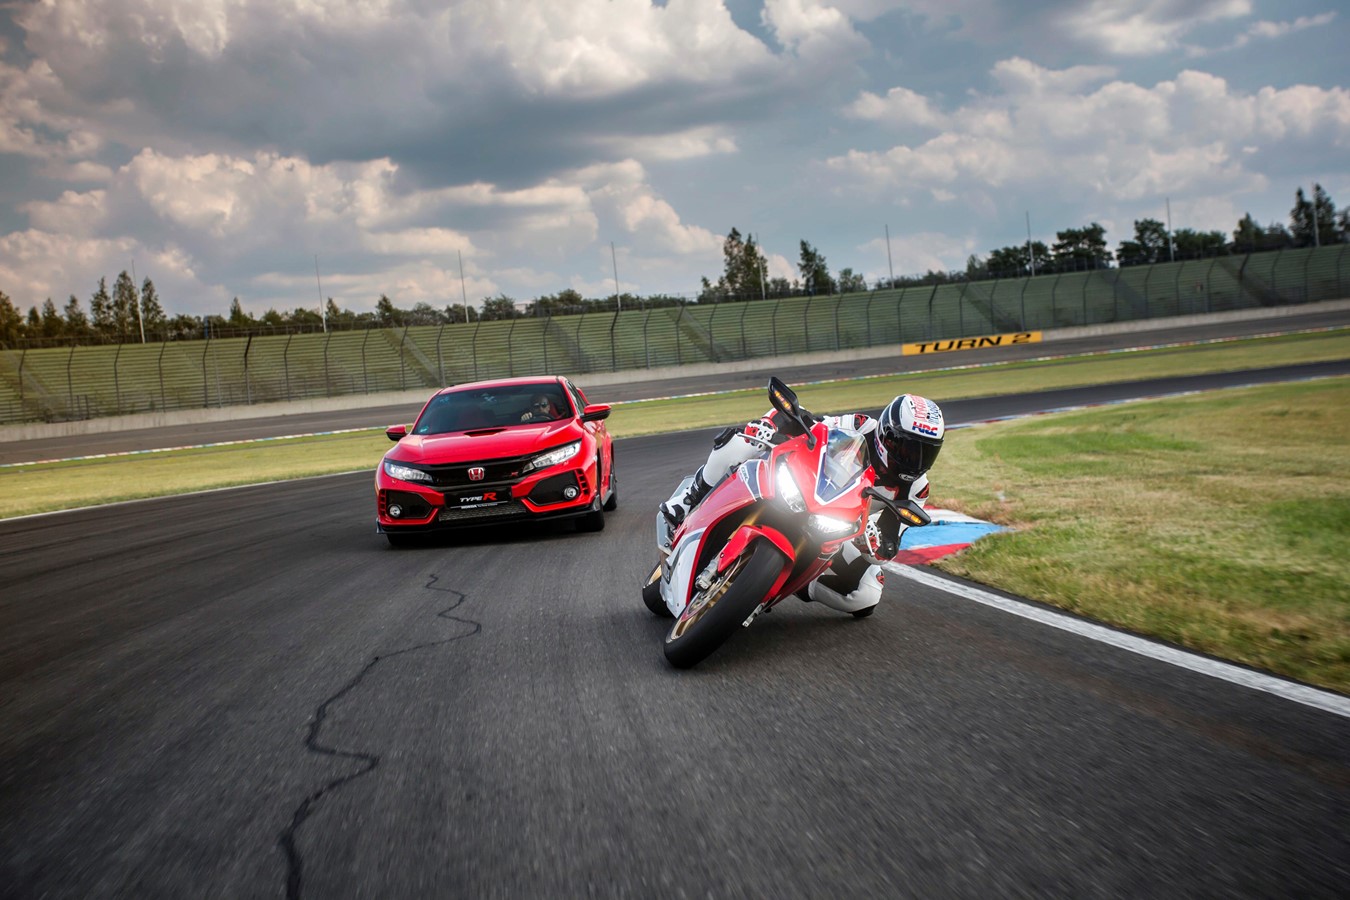 HONDA CELEBRATES 25 YEARS OF TYPE R AND FIREBLADE AT GOODWOOD FESTIVAL OF SPEED